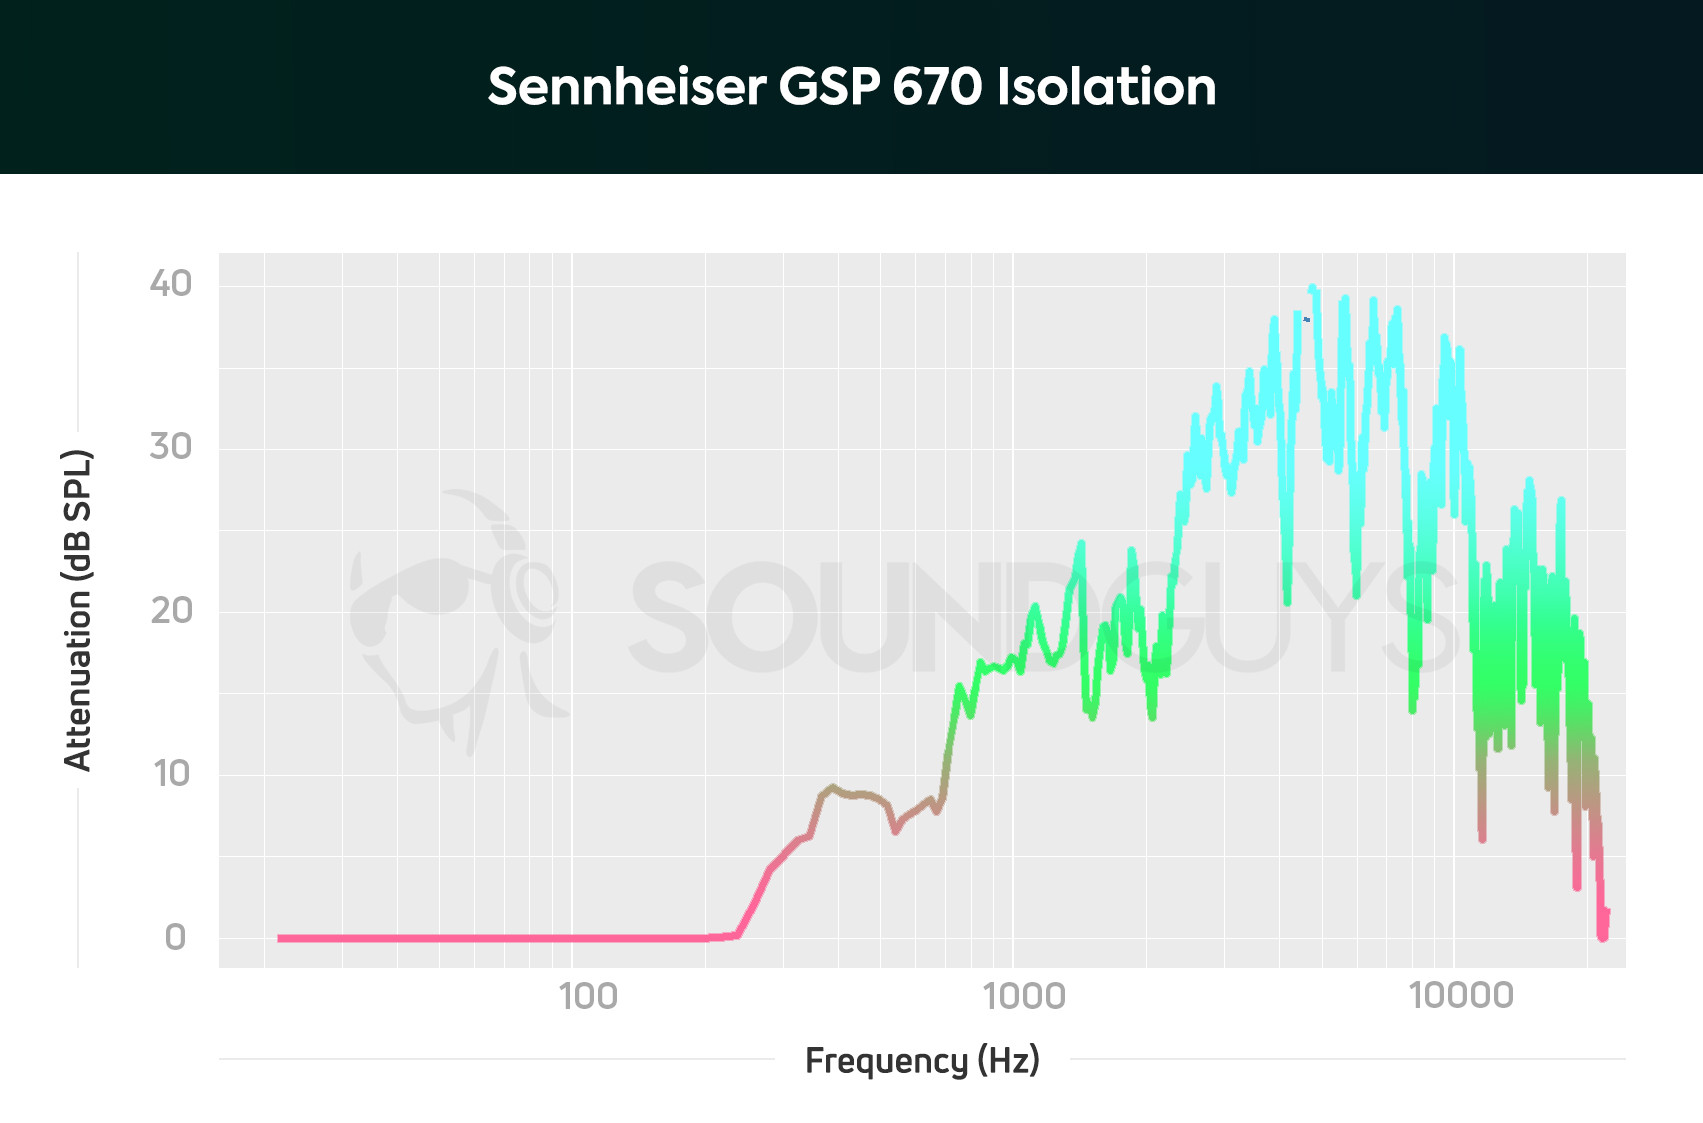 An isolation chart for the Sennheiser GSP 670, which shows well above average attenuation in the mid and high range.